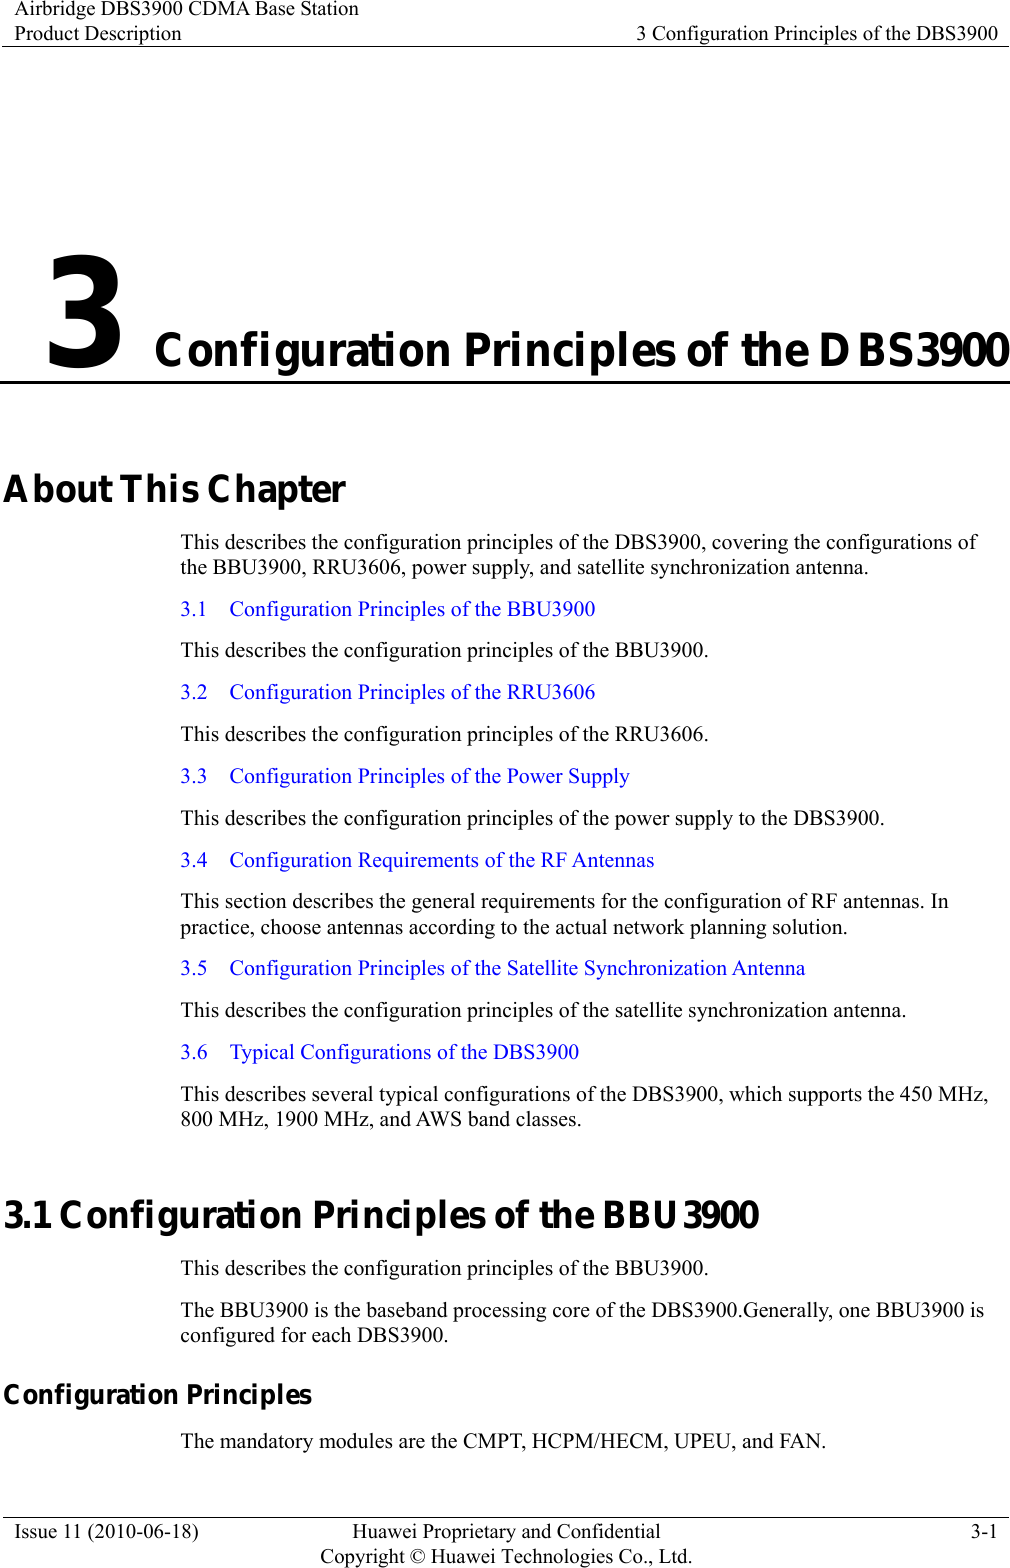 Airbridge DBS3900 CDMA Base Station Product Description  3 Configuration Principles of the DBS3900 Issue 11 (2010-06-18)  Huawei Proprietary and Confidential         Copyright © Huawei Technologies Co., Ltd.3-1 3 Configuration Principles of the DBS3900 About This Chapter This describes the configuration principles of the DBS3900, covering the configurations of the BBU3900, RRU3606, power supply, and satellite synchronization antenna. 3.1    Configuration Principles of the BBU3900 This describes the configuration principles of the BBU3900. 3.2    Configuration Principles of the RRU3606 This describes the configuration principles of the RRU3606. 3.3    Configuration Principles of the Power Supply This describes the configuration principles of the power supply to the DBS3900. 3.4    Configuration Requirements of the RF Antennas This section describes the general requirements for the configuration of RF antennas. In practice, choose antennas according to the actual network planning solution. 3.5    Configuration Principles of the Satellite Synchronization Antenna This describes the configuration principles of the satellite synchronization antenna. 3.6    Typical Configurations of the DBS3900 This describes several typical configurations of the DBS3900, which supports the 450 MHz, 800 MHz, 1900 MHz, and AWS band classes. 3.1 Configuration Principles of the BBU3900 This describes the configuration principles of the BBU3900. The BBU3900 is the baseband processing core of the DBS3900.Generally, one BBU3900 is configured for each DBS3900. Configuration Principles   The mandatory modules are the CMPT, HCPM/HECM, UPEU, and FAN.   